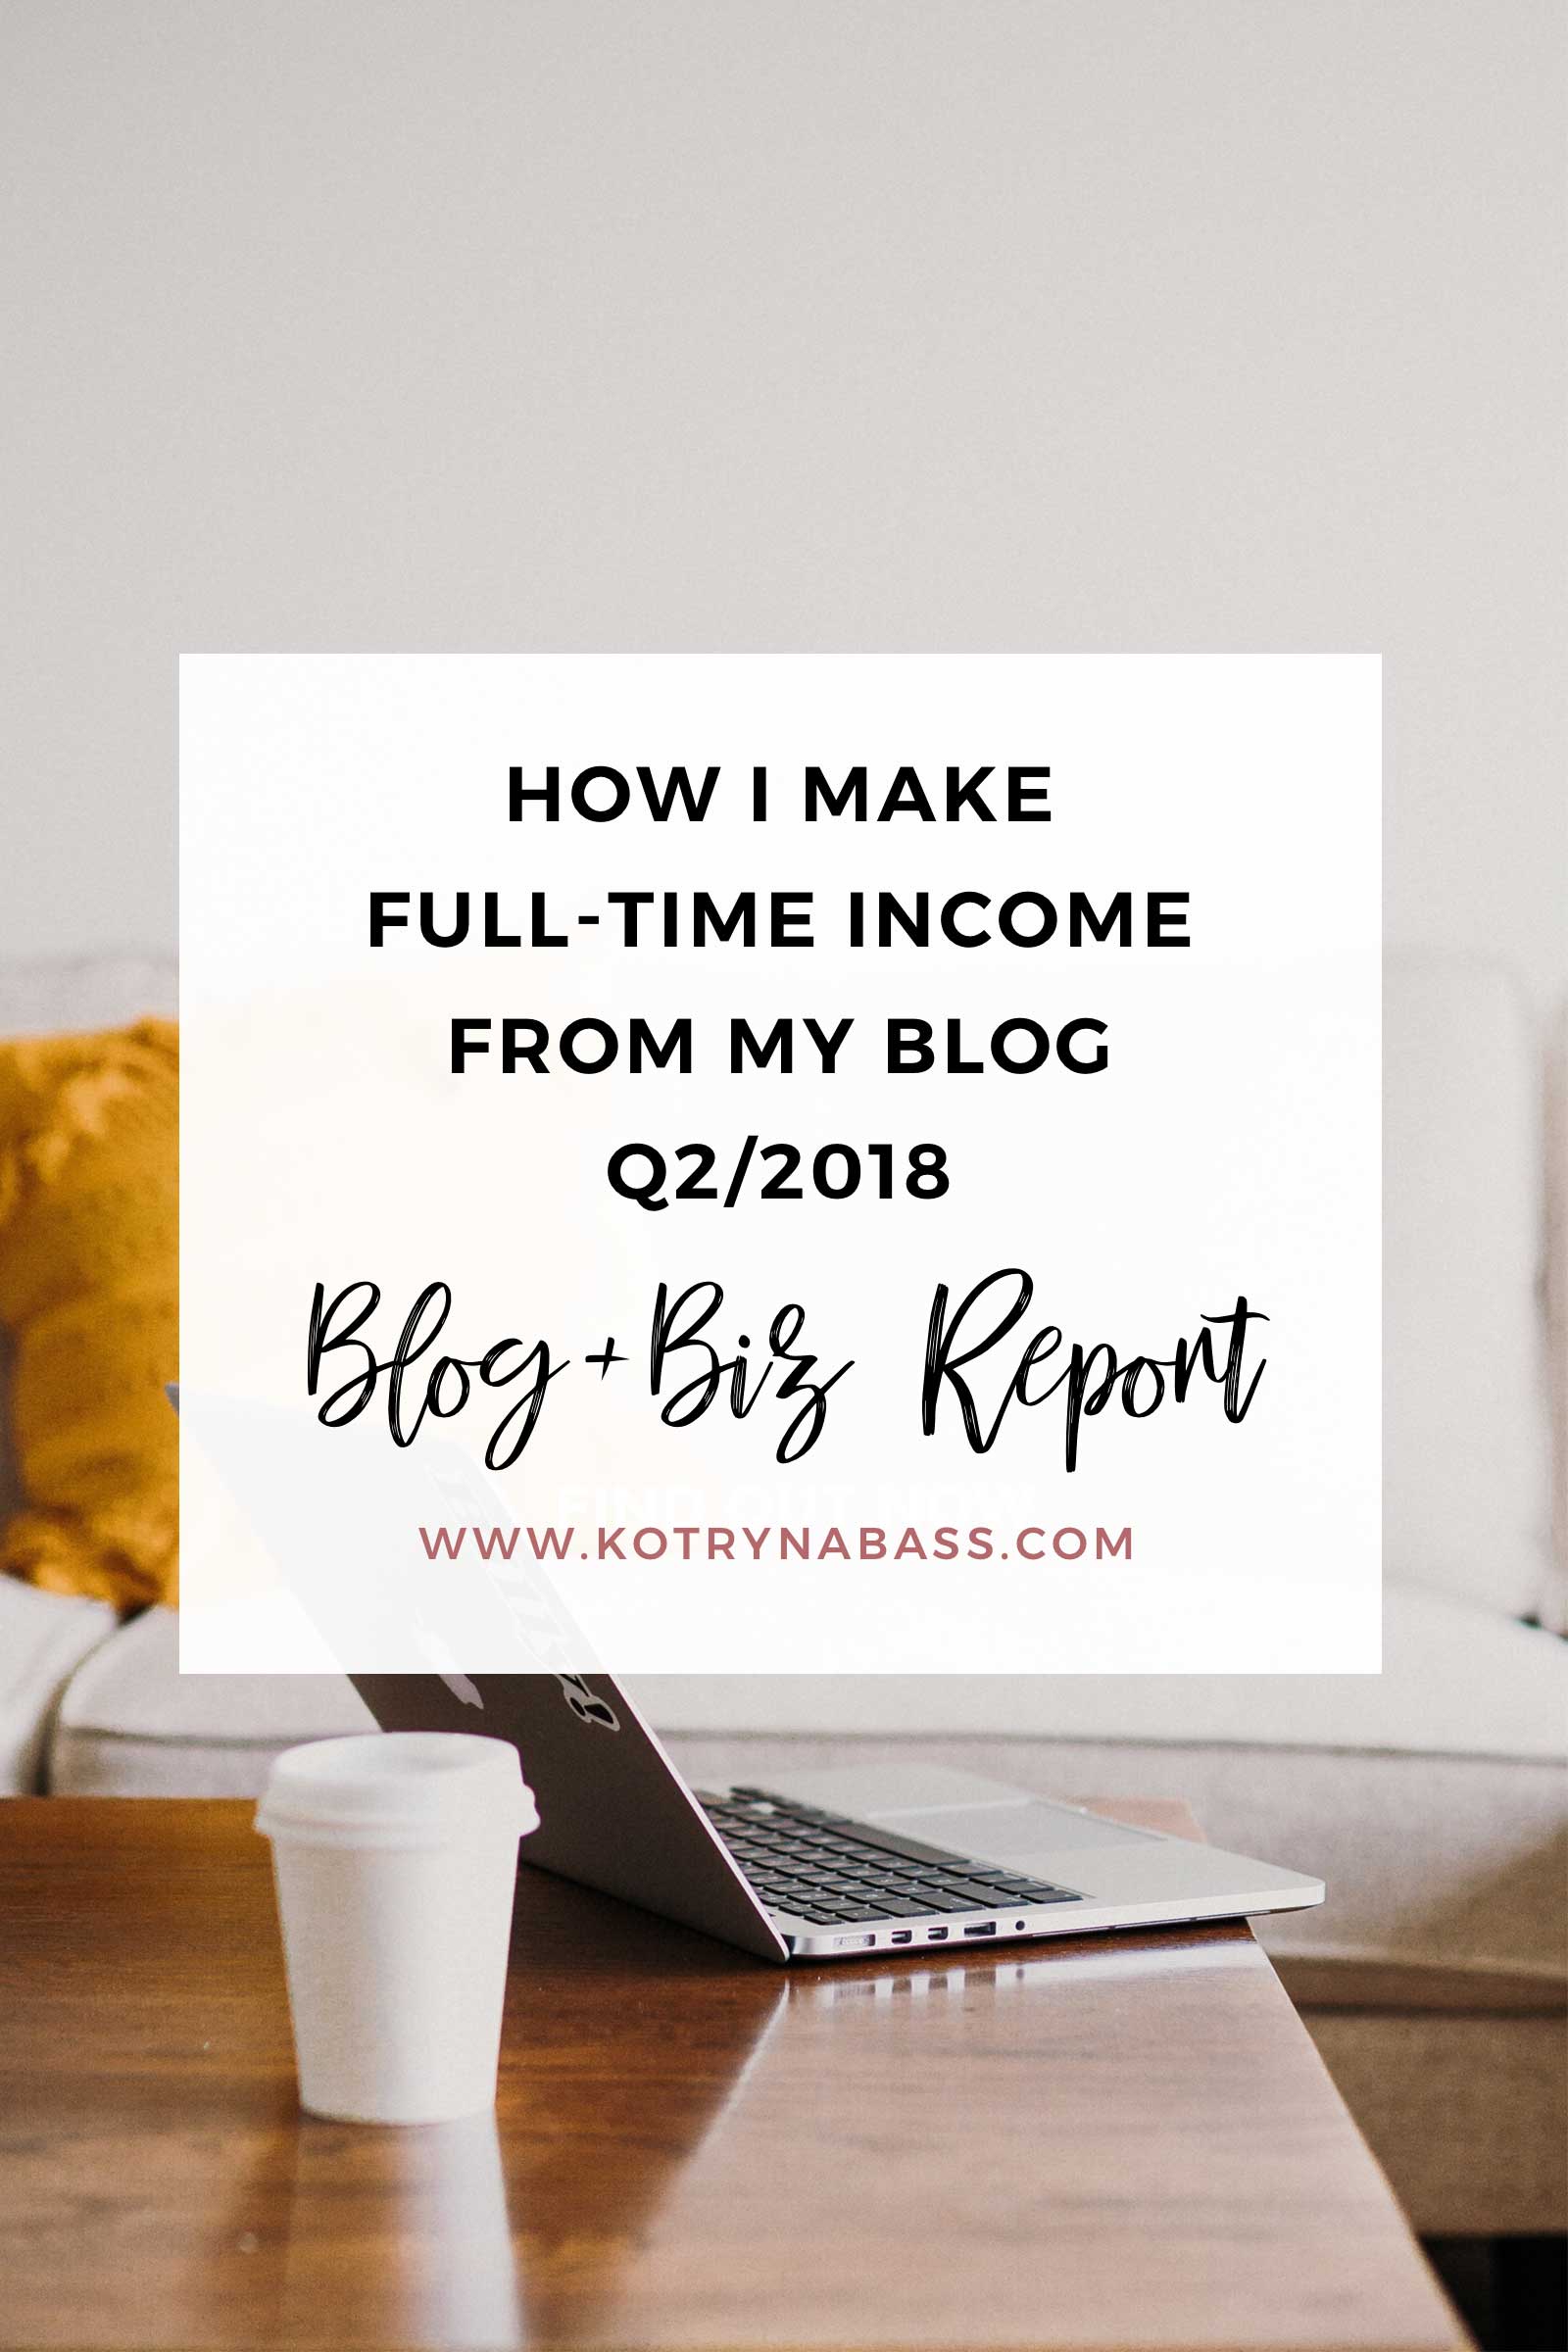 Can you believe that 1/2 of 2018 is already gone? How crazy is that! Are you interested to see how well we did in the second quarter of the year? Let’s take a look!